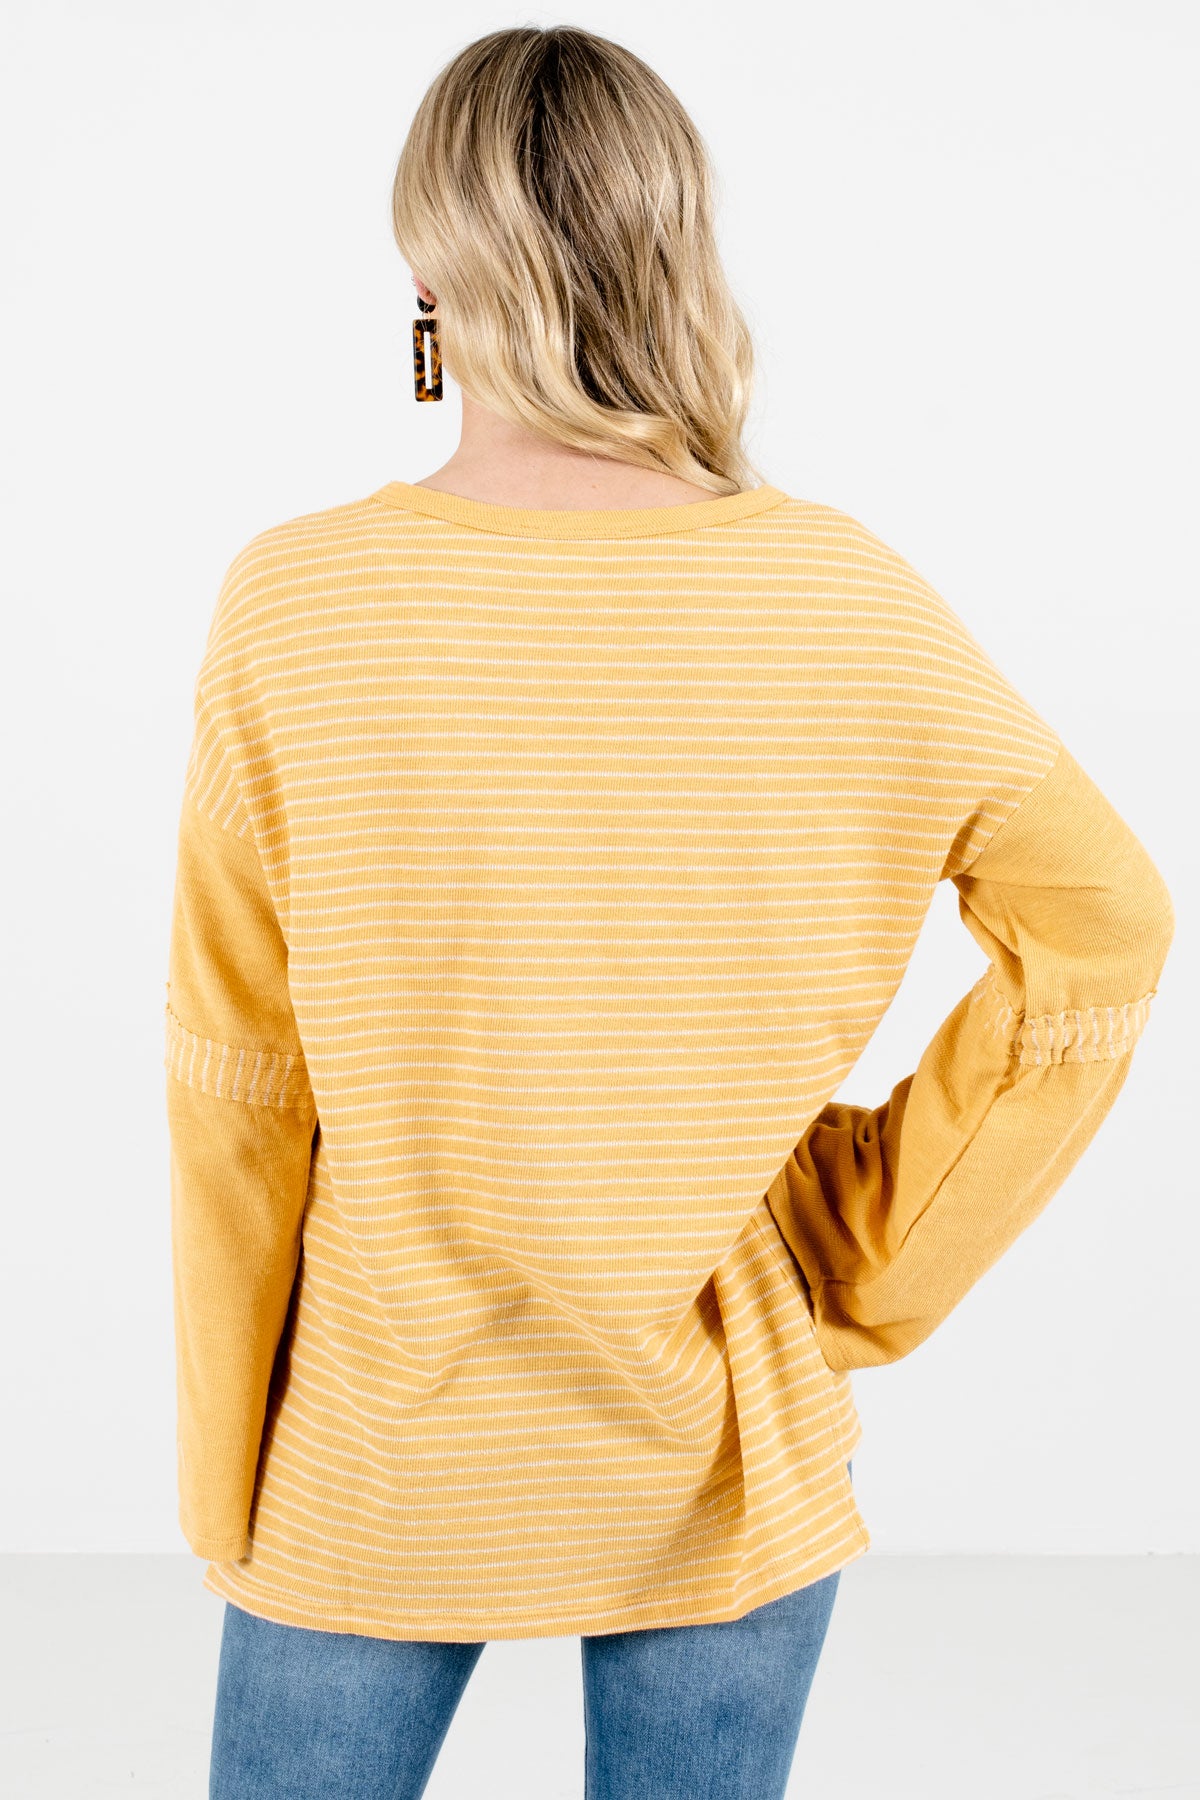 Women's Yellow Wide Bell Sleeve Boutique Tops